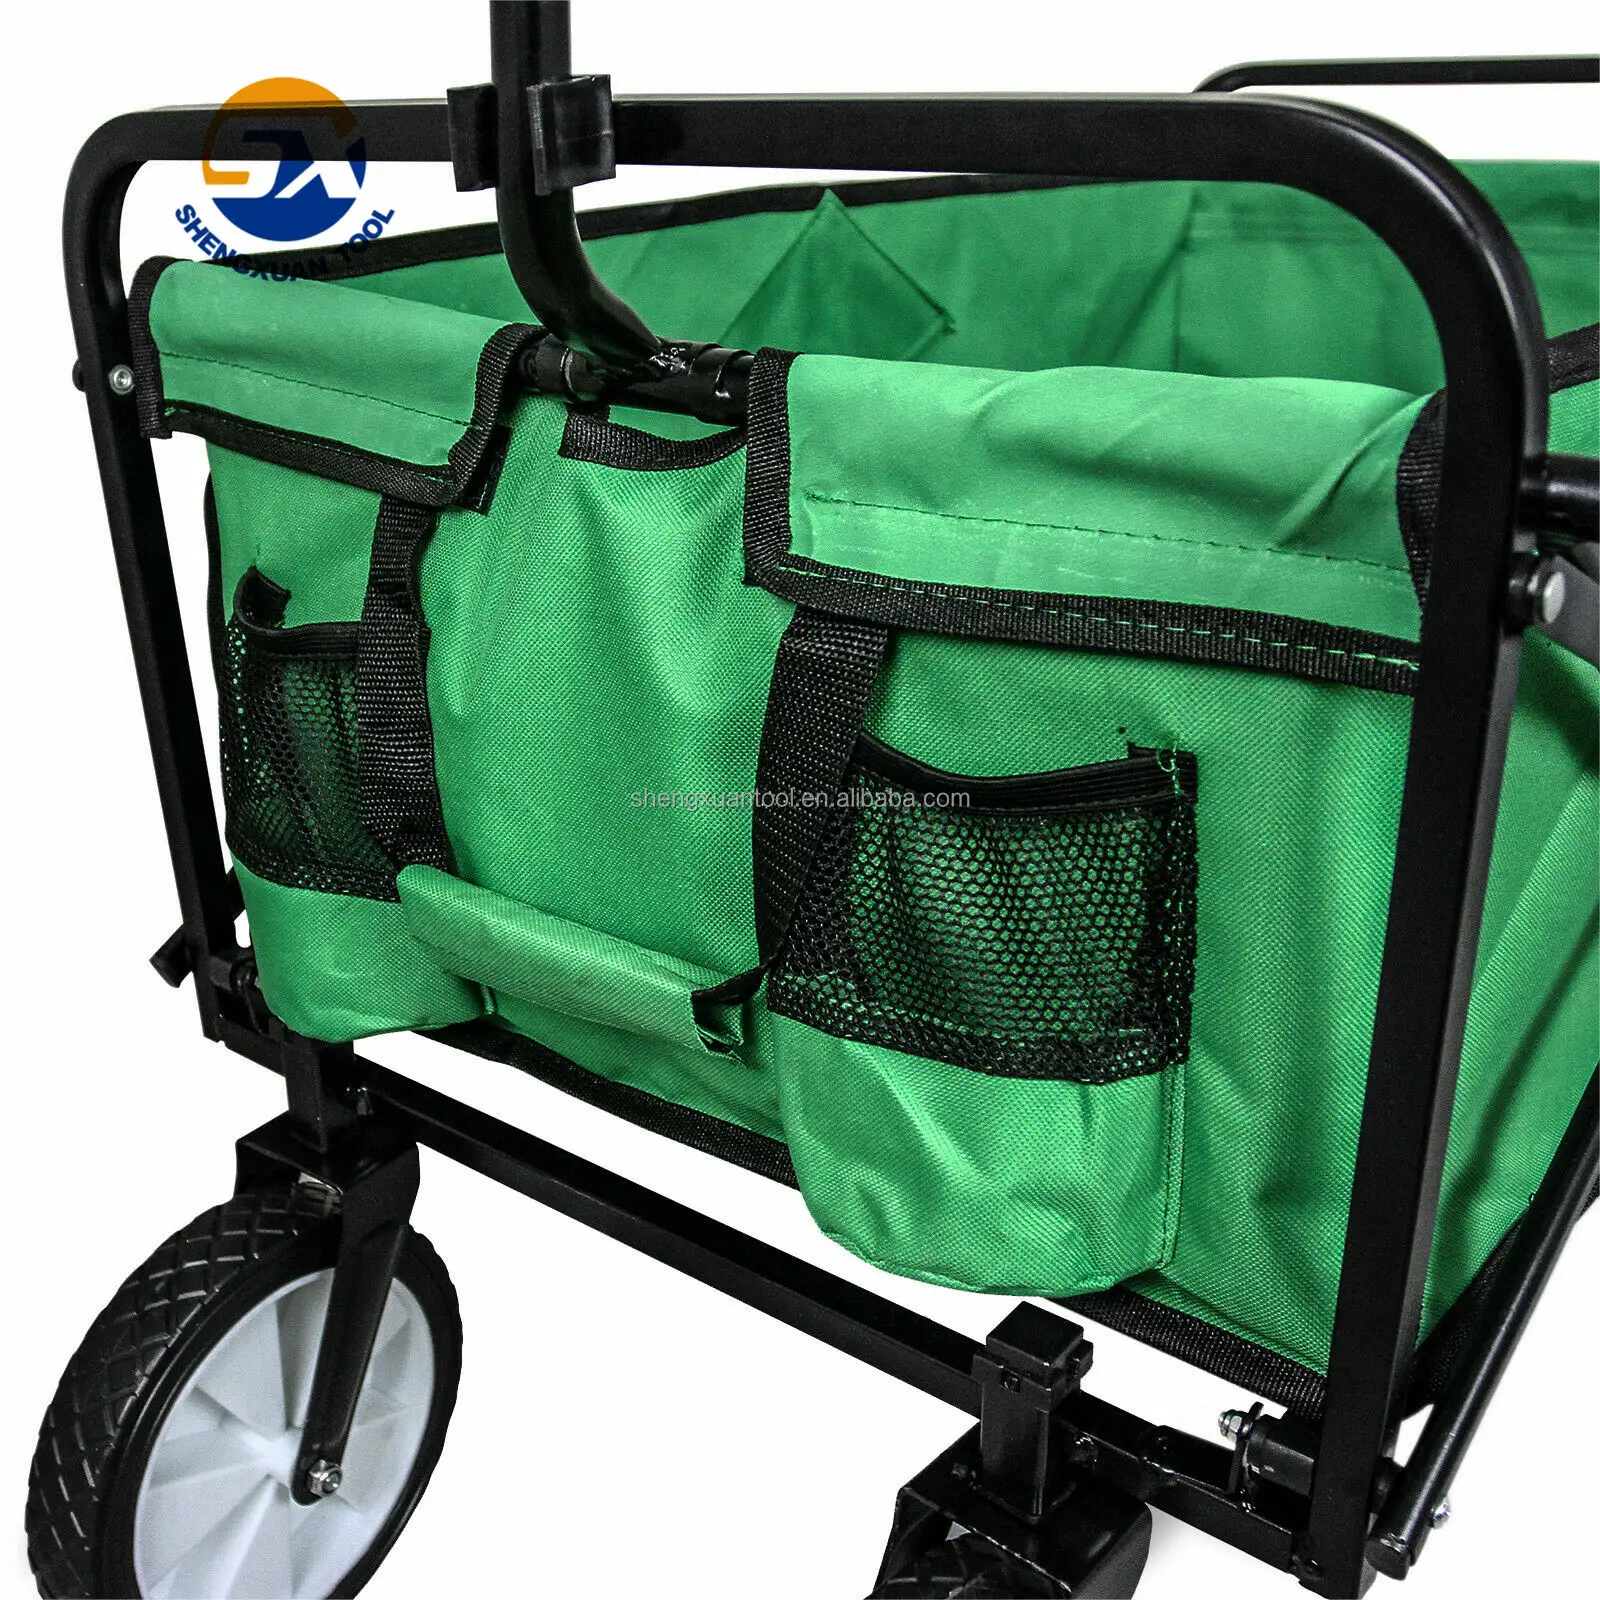 Beach Wagon Utility Outdoor Camping Beach Cart Collapsible Folding Utility Cart Wagon with All-Terrain Wheels